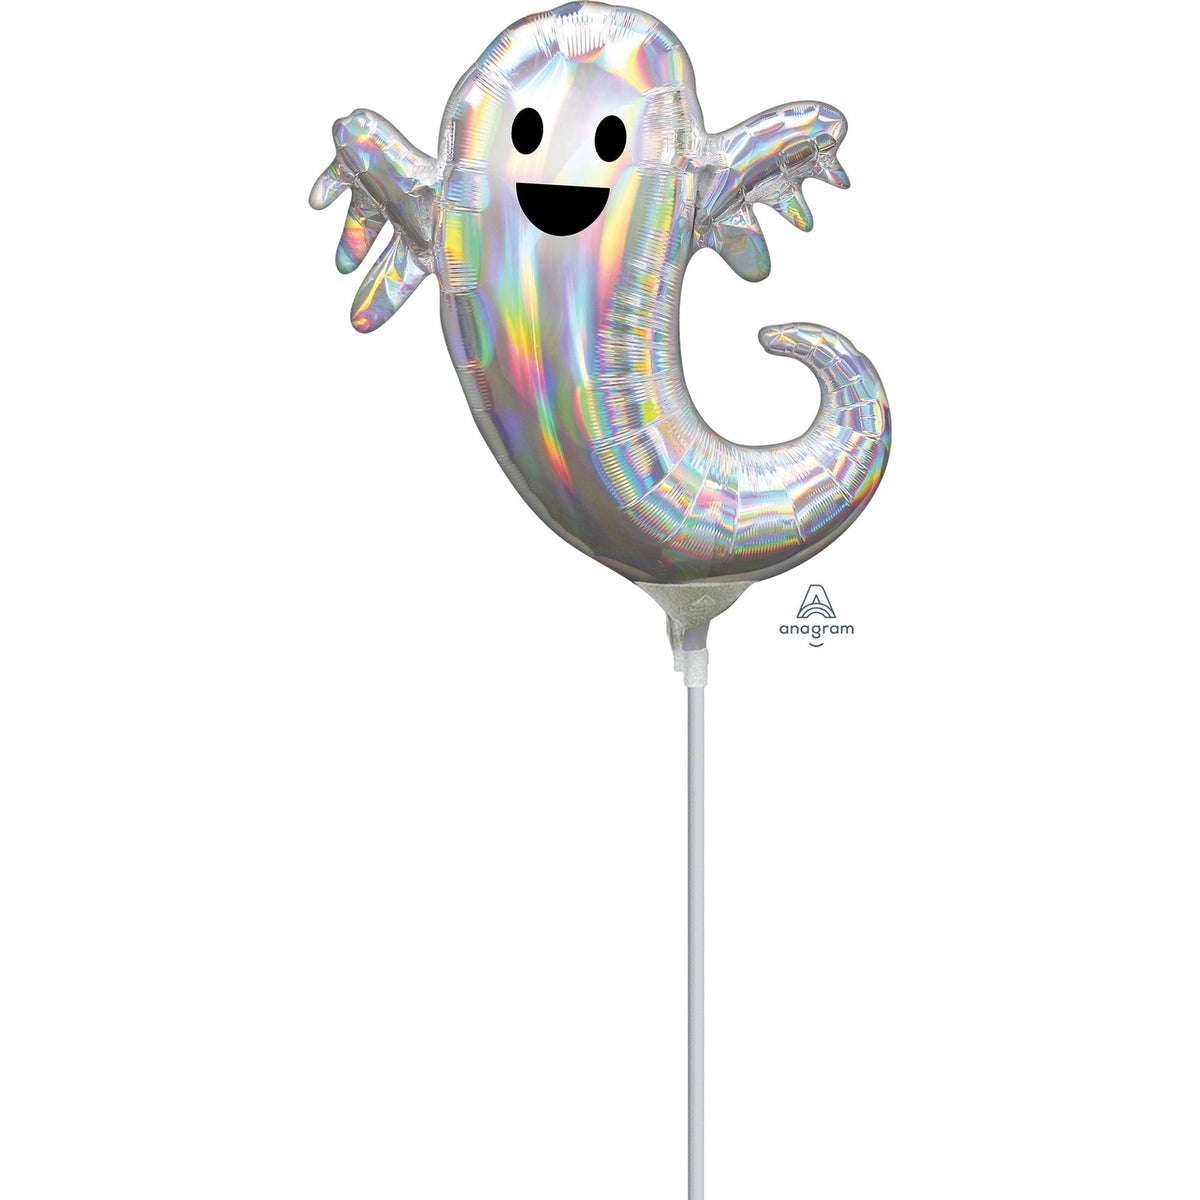 LE GROUPE BLC INTL INC Balloons Halloween Iridescent Ghost Air-Filled Foil Balloon, 14 Inches 026635399982